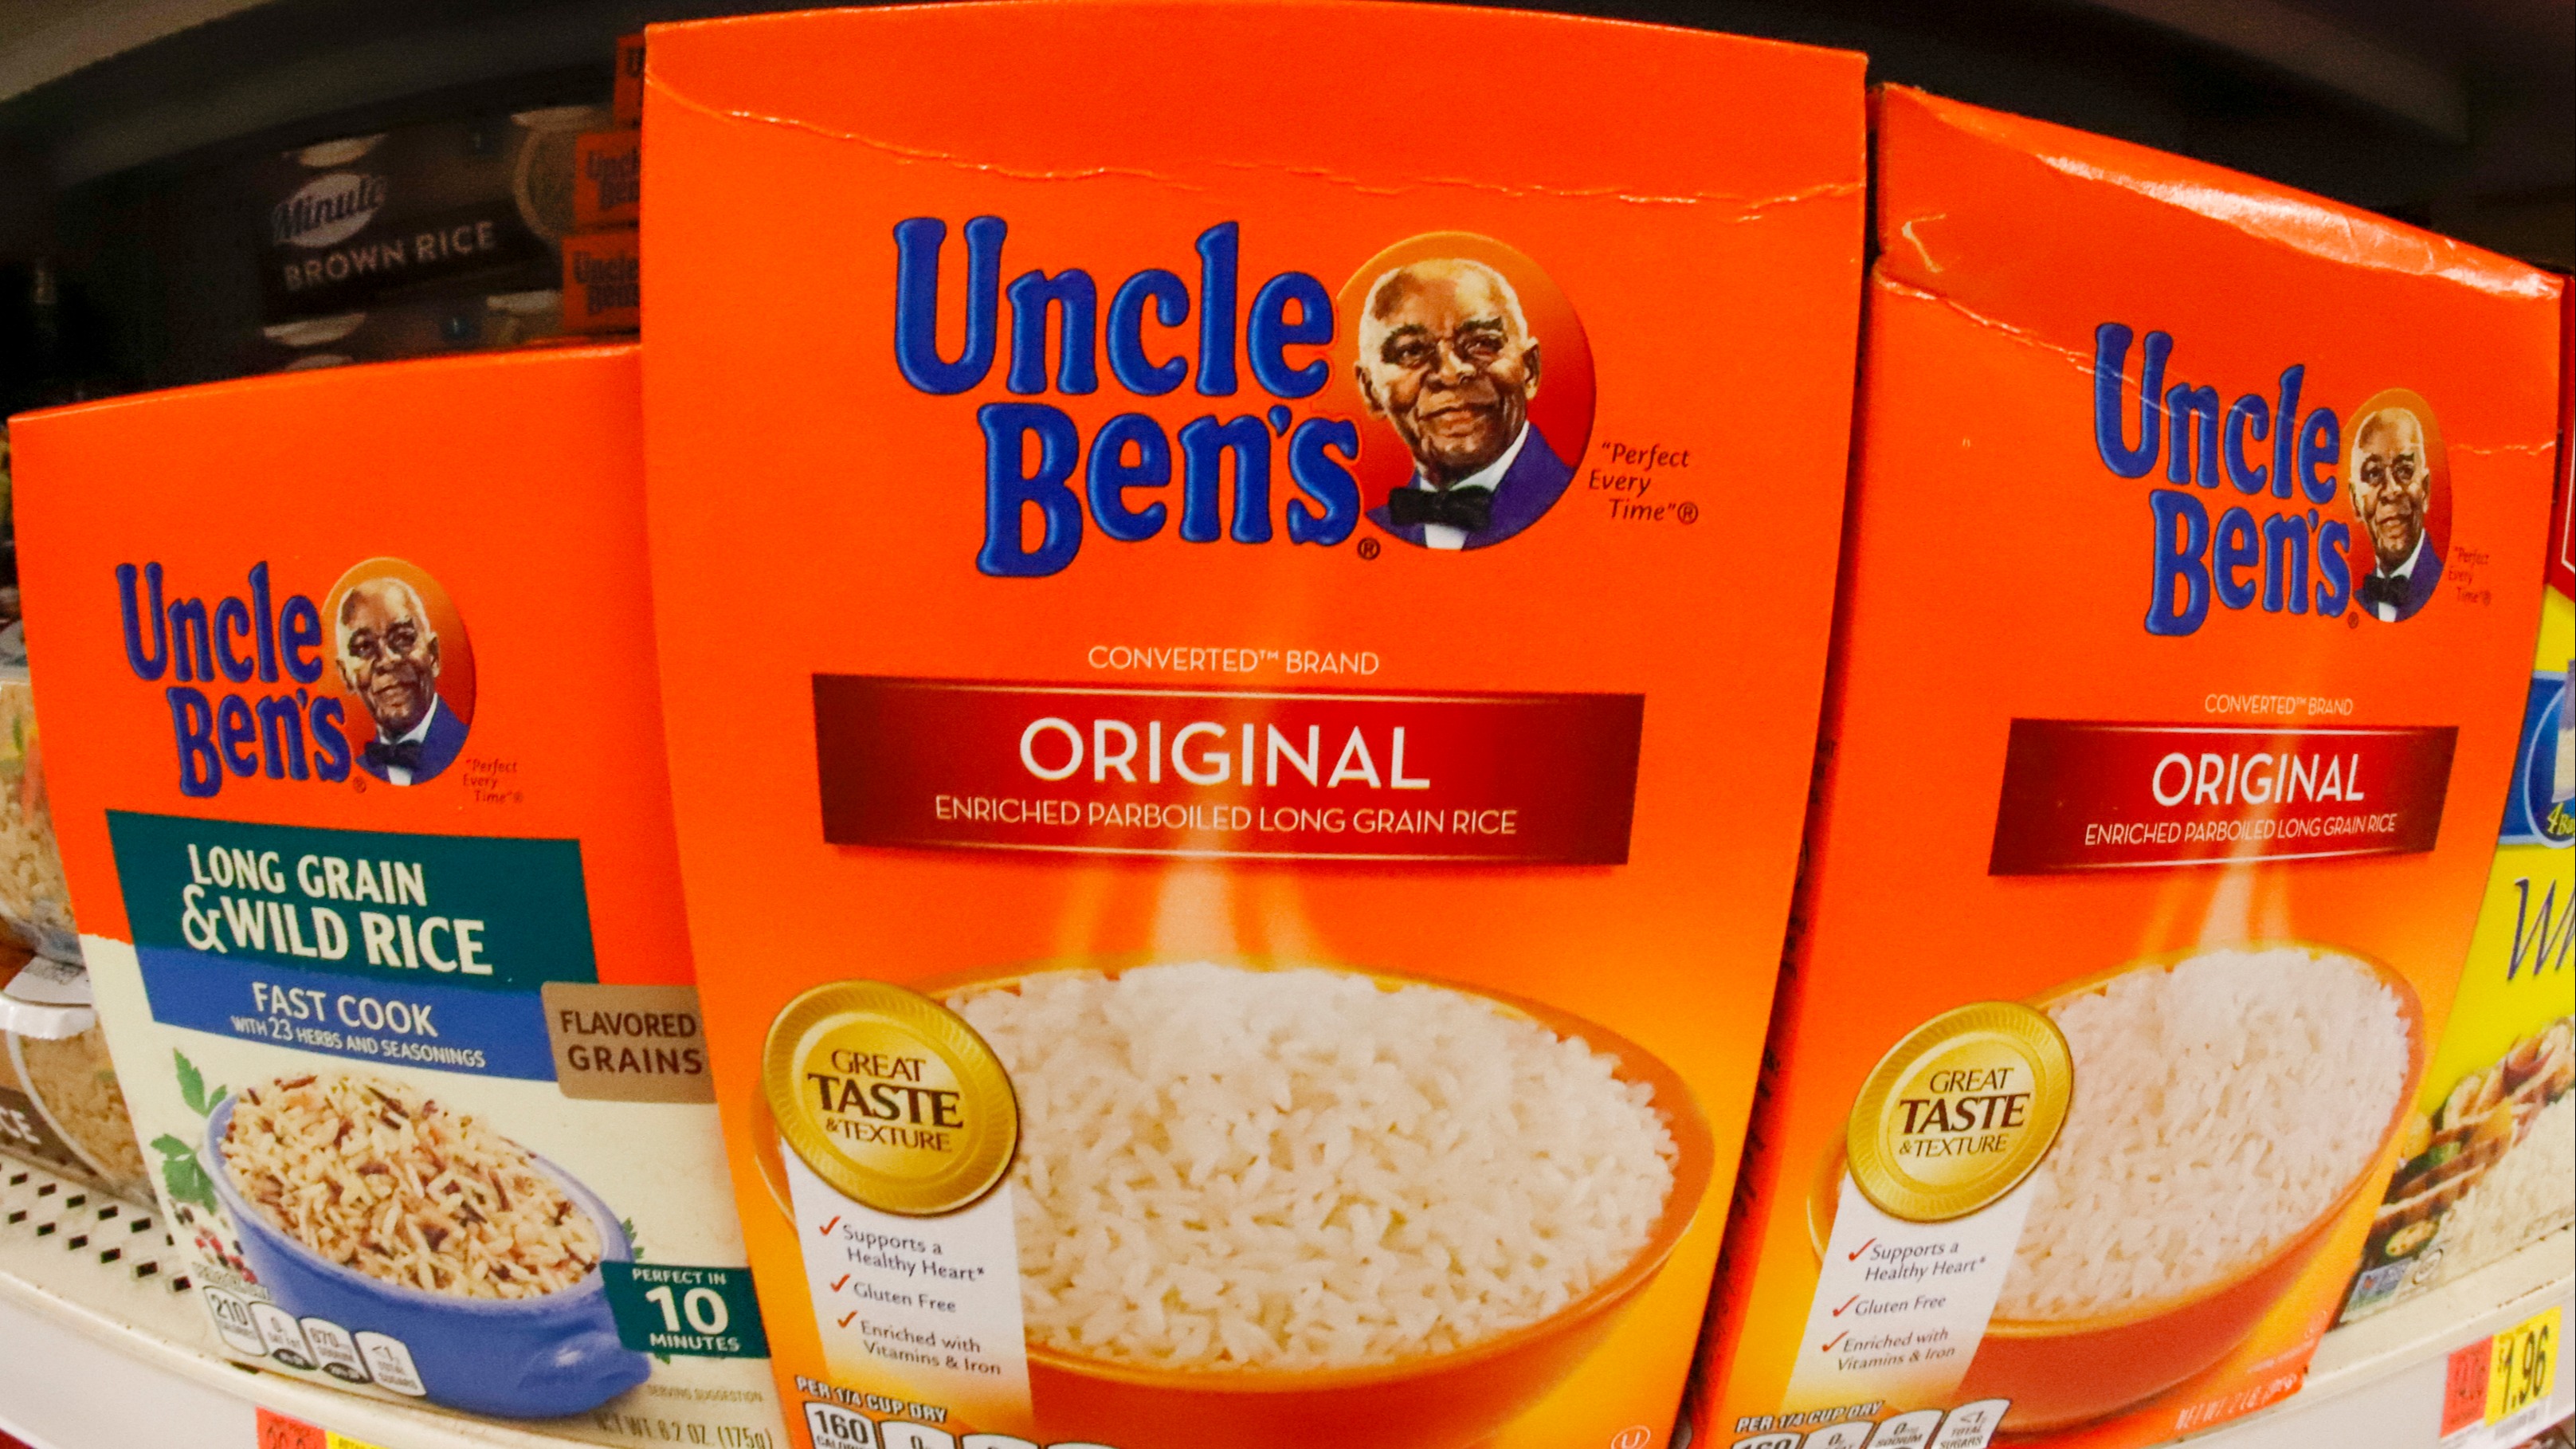 Uncle Ben's Gets a Name Makeover. He's Not 'Family' Anymore - Colorlines